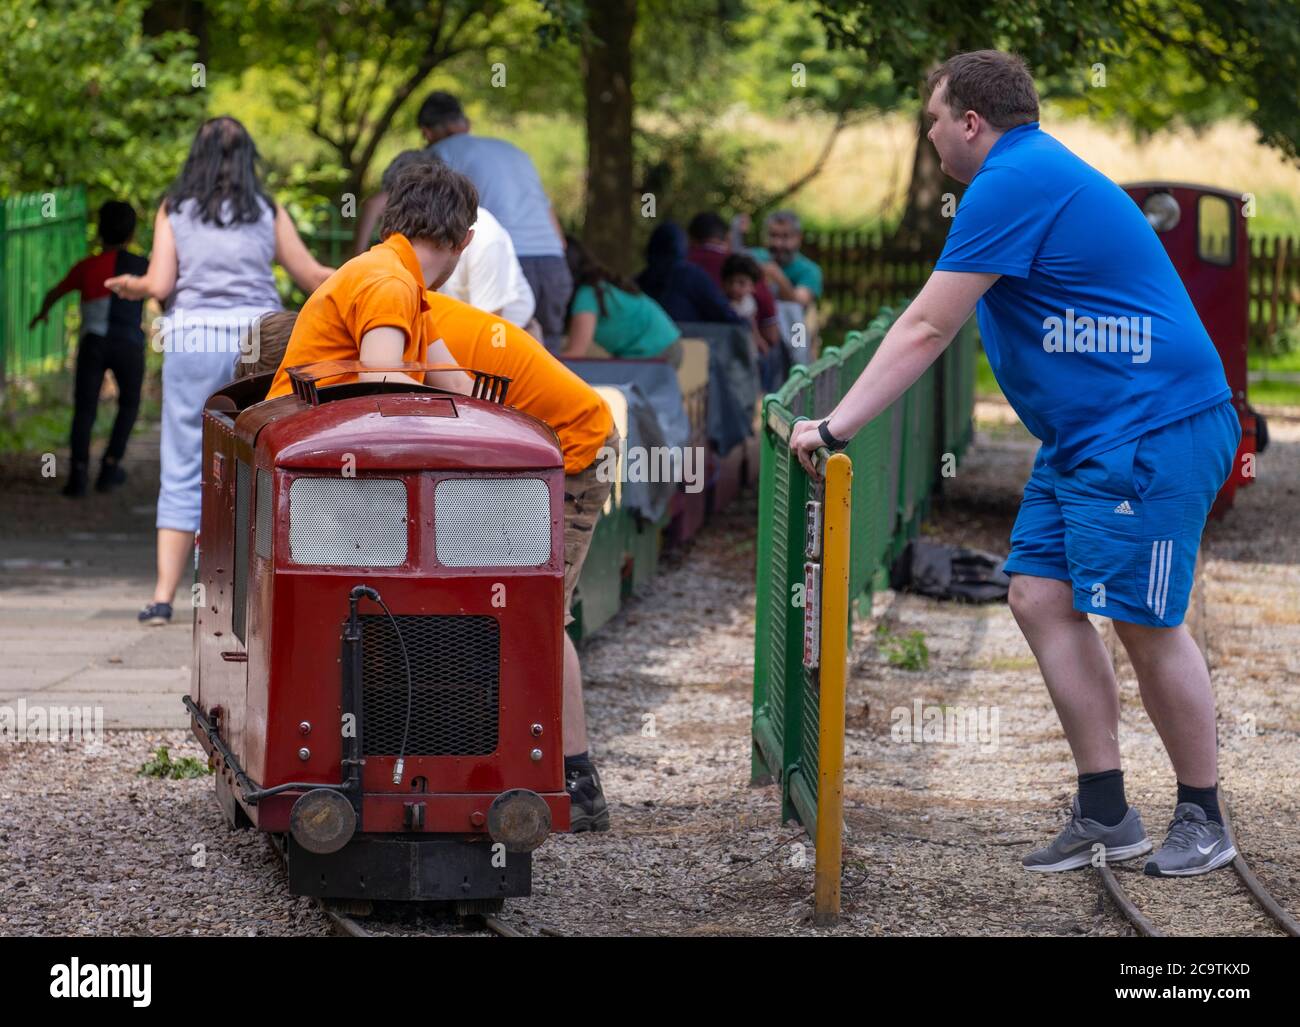 Watford, Hertfordshire, UK. 2 August 2020. Narrow gauge railway in Cassiobury Park, the largest public open space in Watford, attracts Sunday visitors Stock Photo